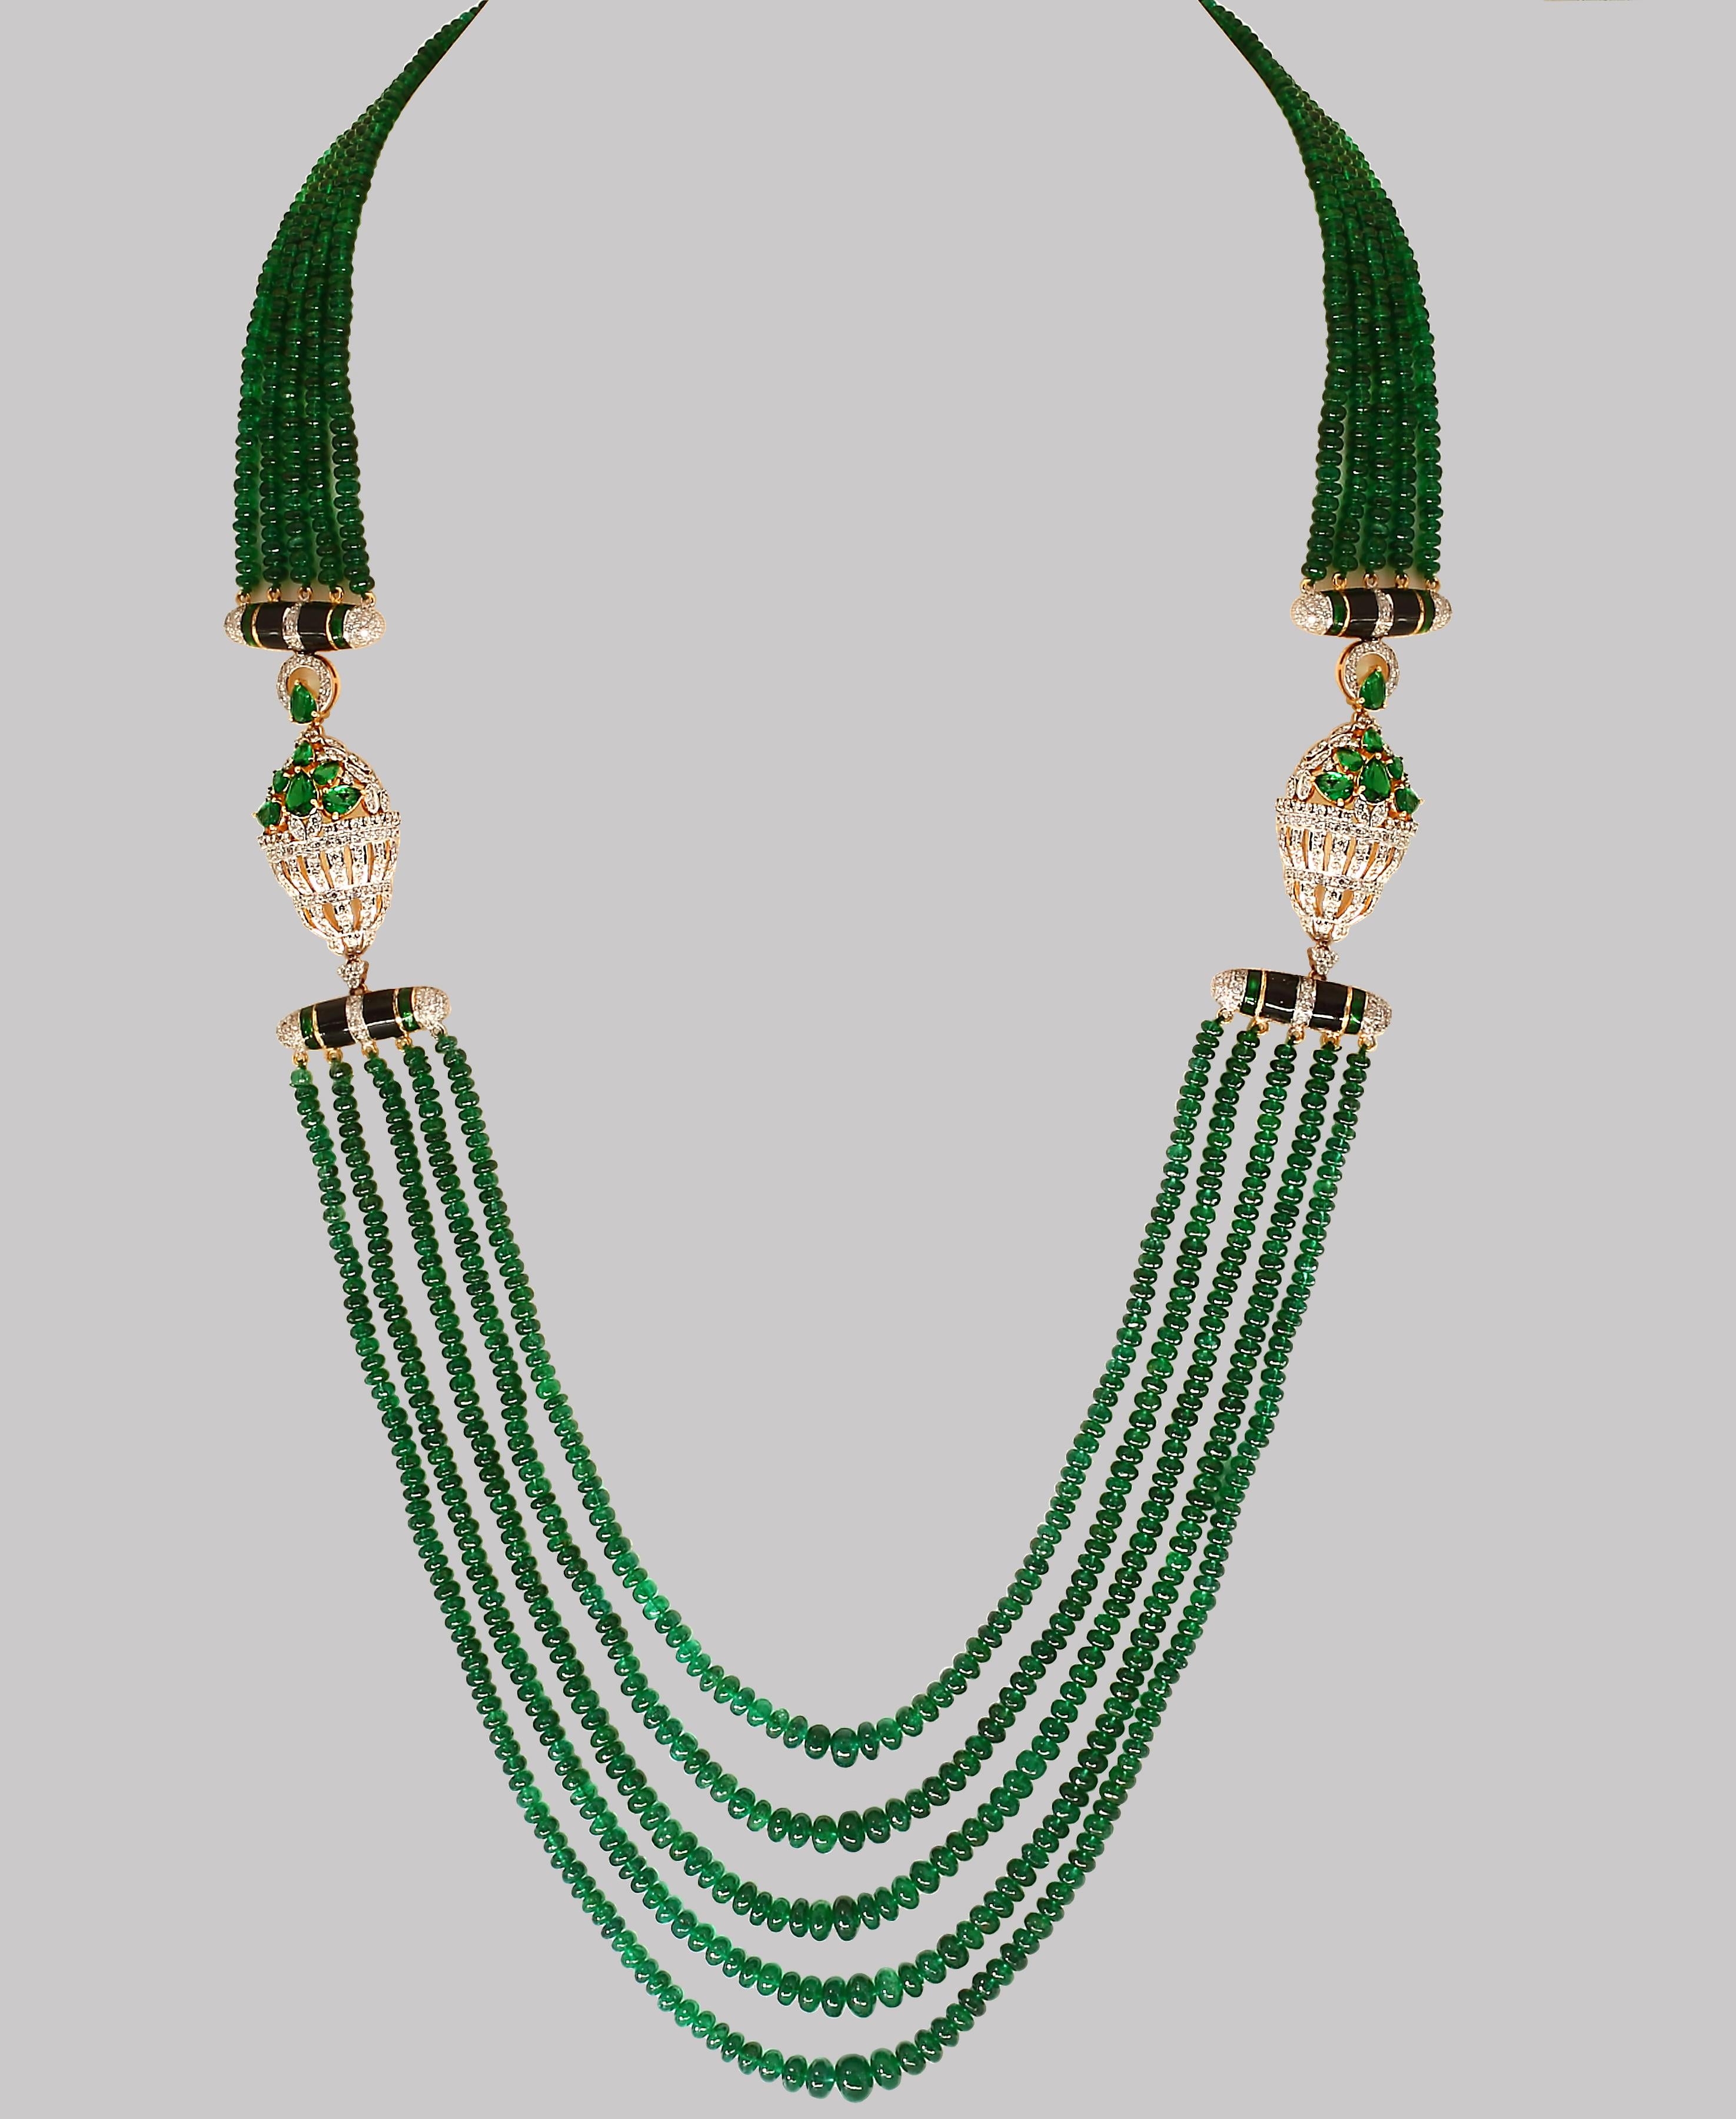 Approximately 335 Carat  very fine Emerald Beads 5 Line Necklace With 14 Karat Yellow Gold Clasp Adjustable with multiple links
This spectacular Necklace   consisting of approximately 335 Ct  of fine beads.
The shine sparkle and brilliance with deep